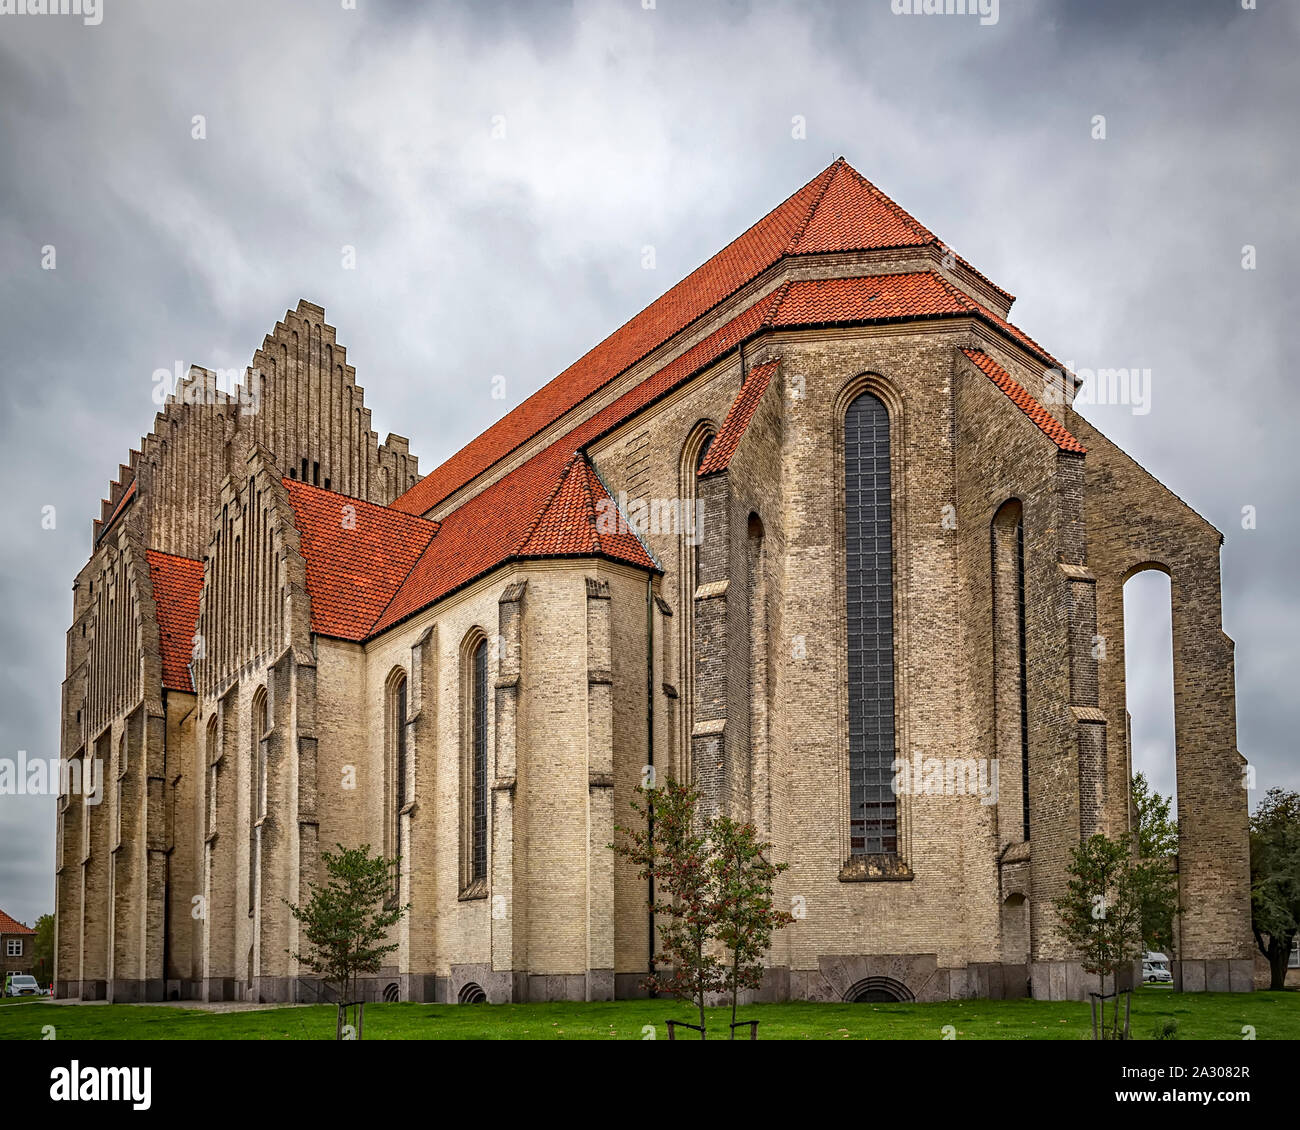 Grundtvig's Church is located in the Bispebjerg district of Copenhagen, Denmark. It is a rare example of expressionist church architecture. Stock Photo